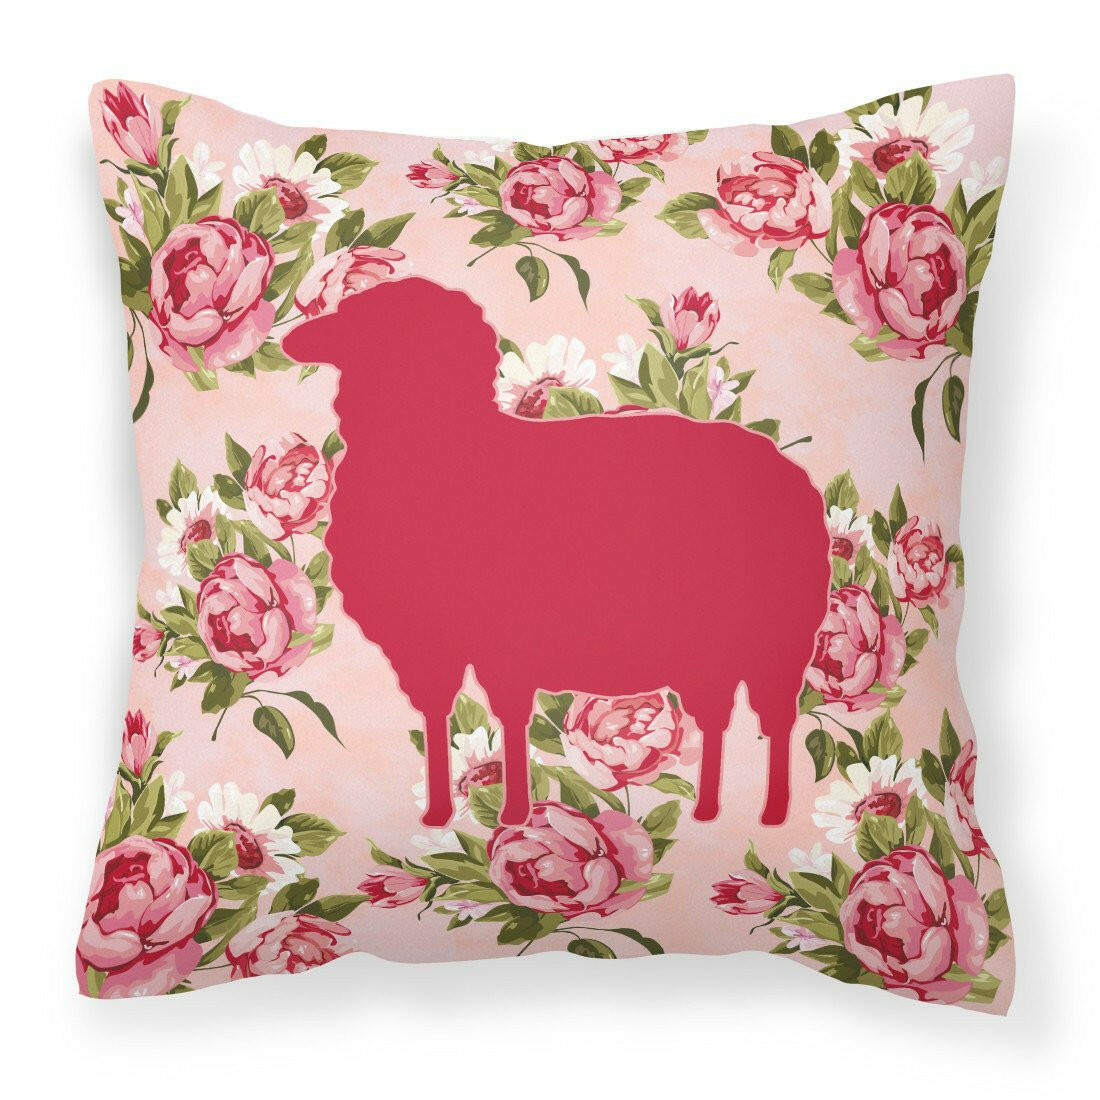 Sheep Shabby Chic Pink Roses  Fabric Decorative Pillow BB1126-RS-PK-PW1414 - the-store.com